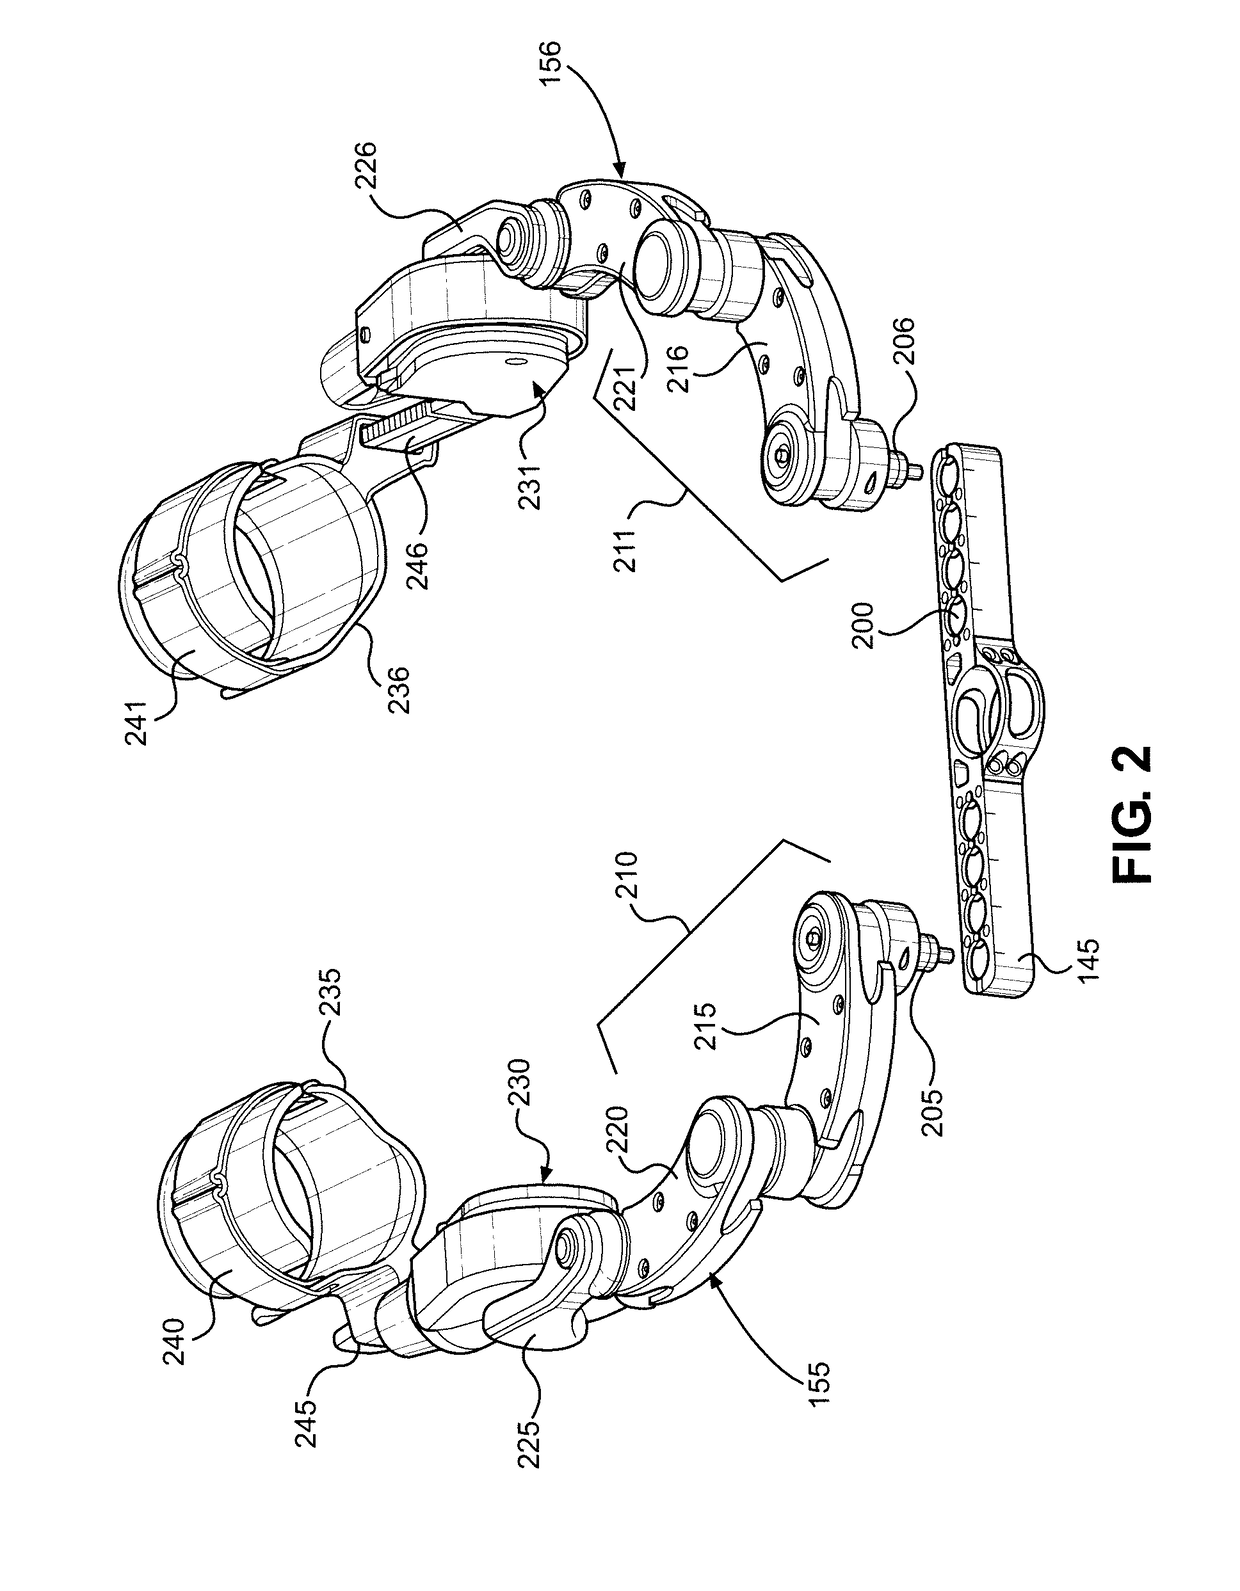 Exoskeleton and Method of Providing an Assistive Torque to an Arm of a Wearer